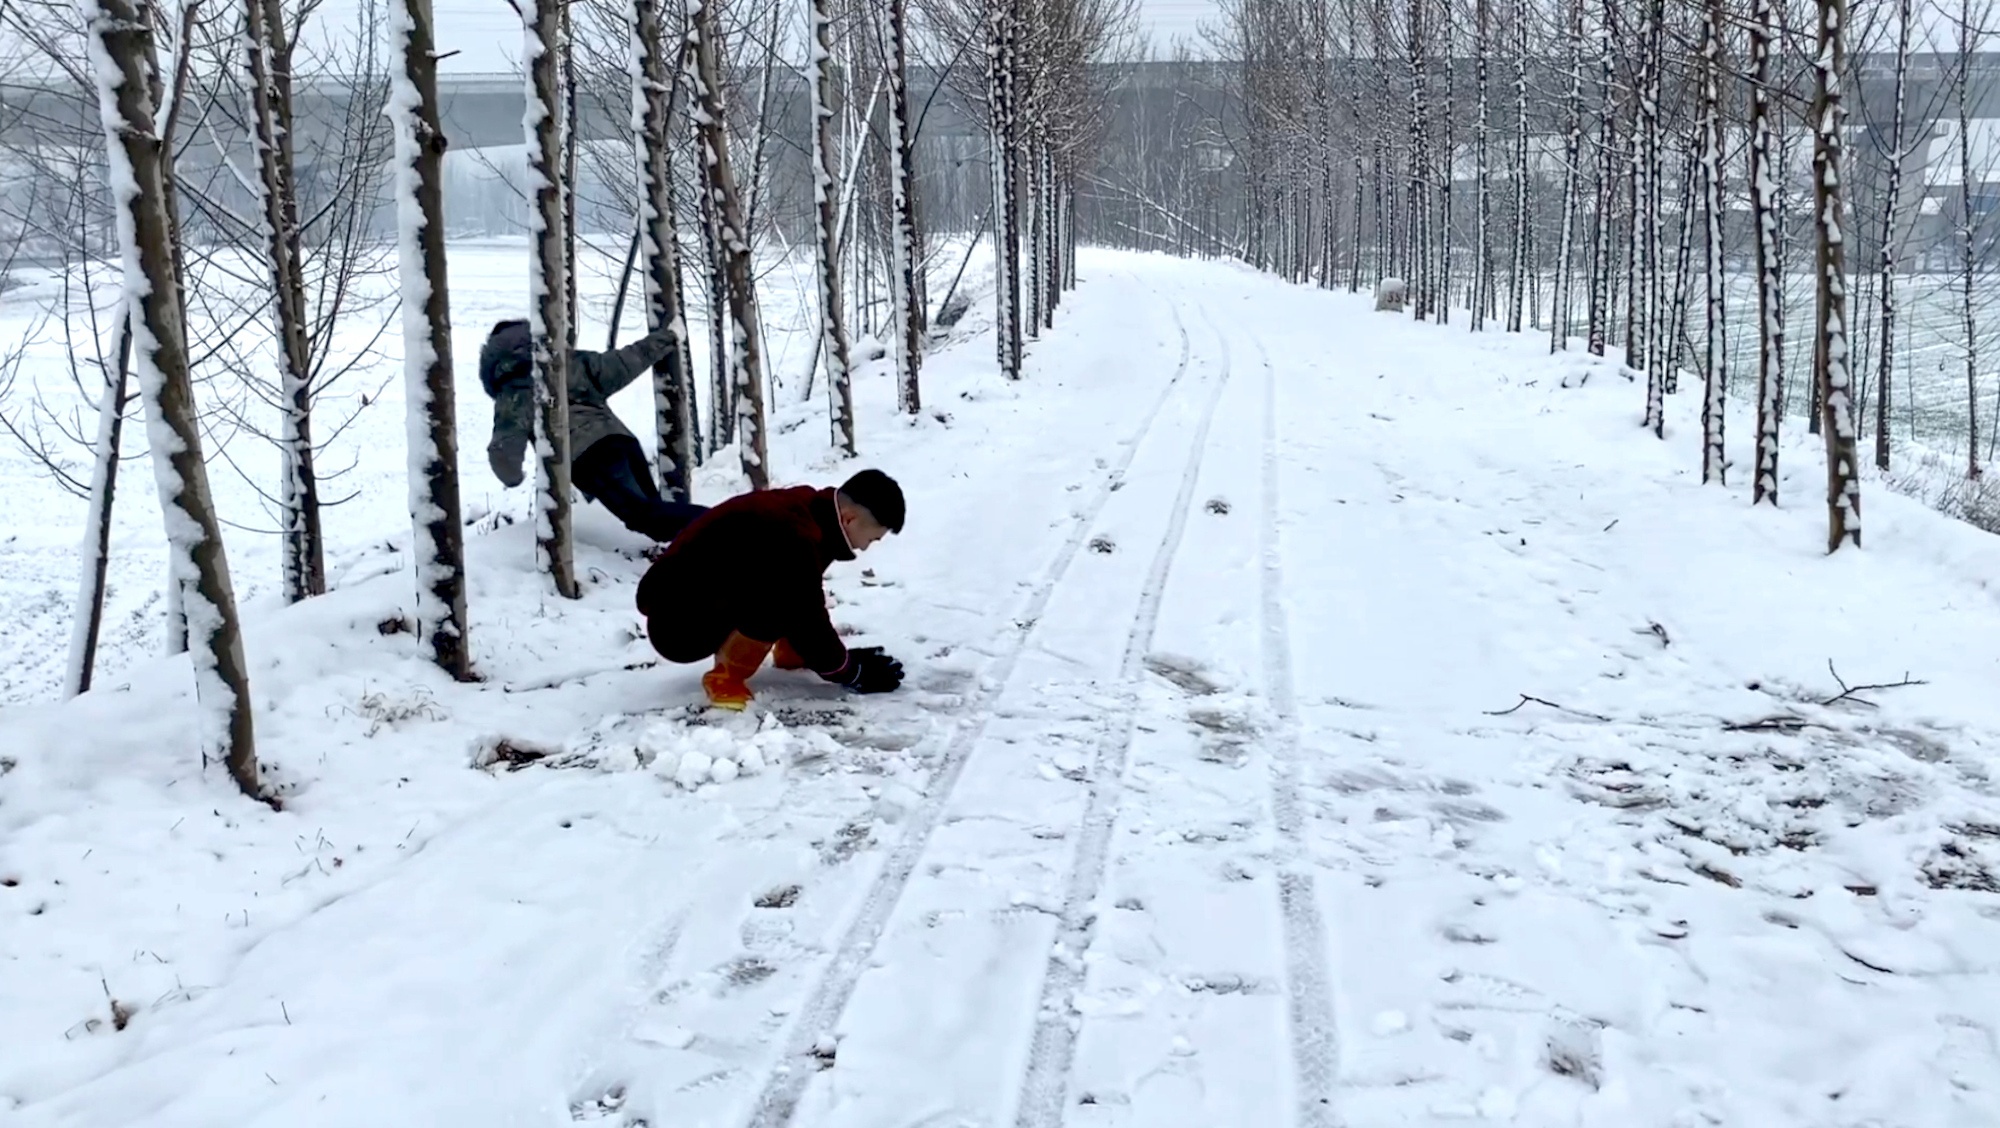 Read more about the article Funny Moment Boy Tries Kick Snow-Laden Tree In Winter Wonderland But Misses And Tumbles Down Hill